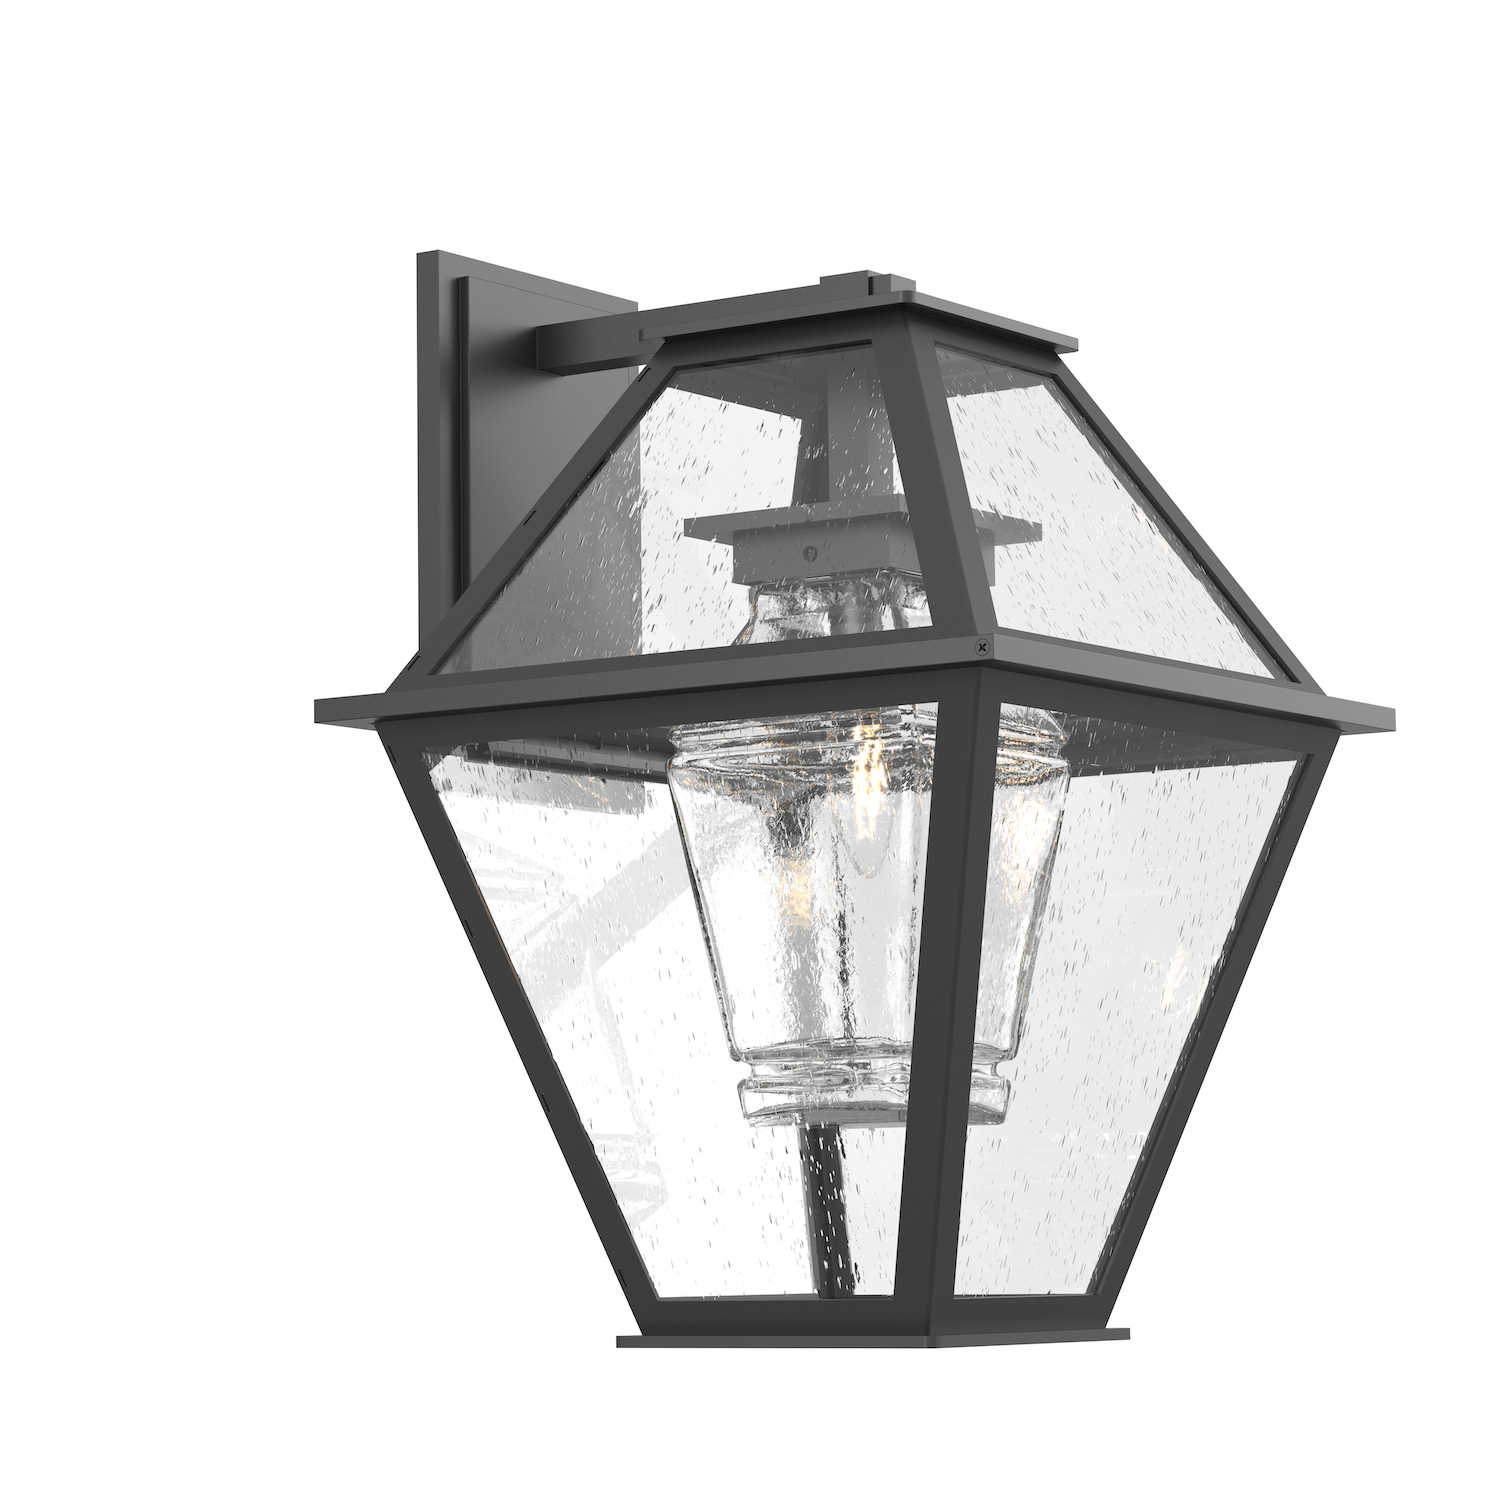 ODB0072-03-AG-CC-Hammerton-Studio-Terrace-24-inch-outdoor-nested-lantern-with-argento-grey-finish-and-clear-glass-shade-and-incandescent-lamping